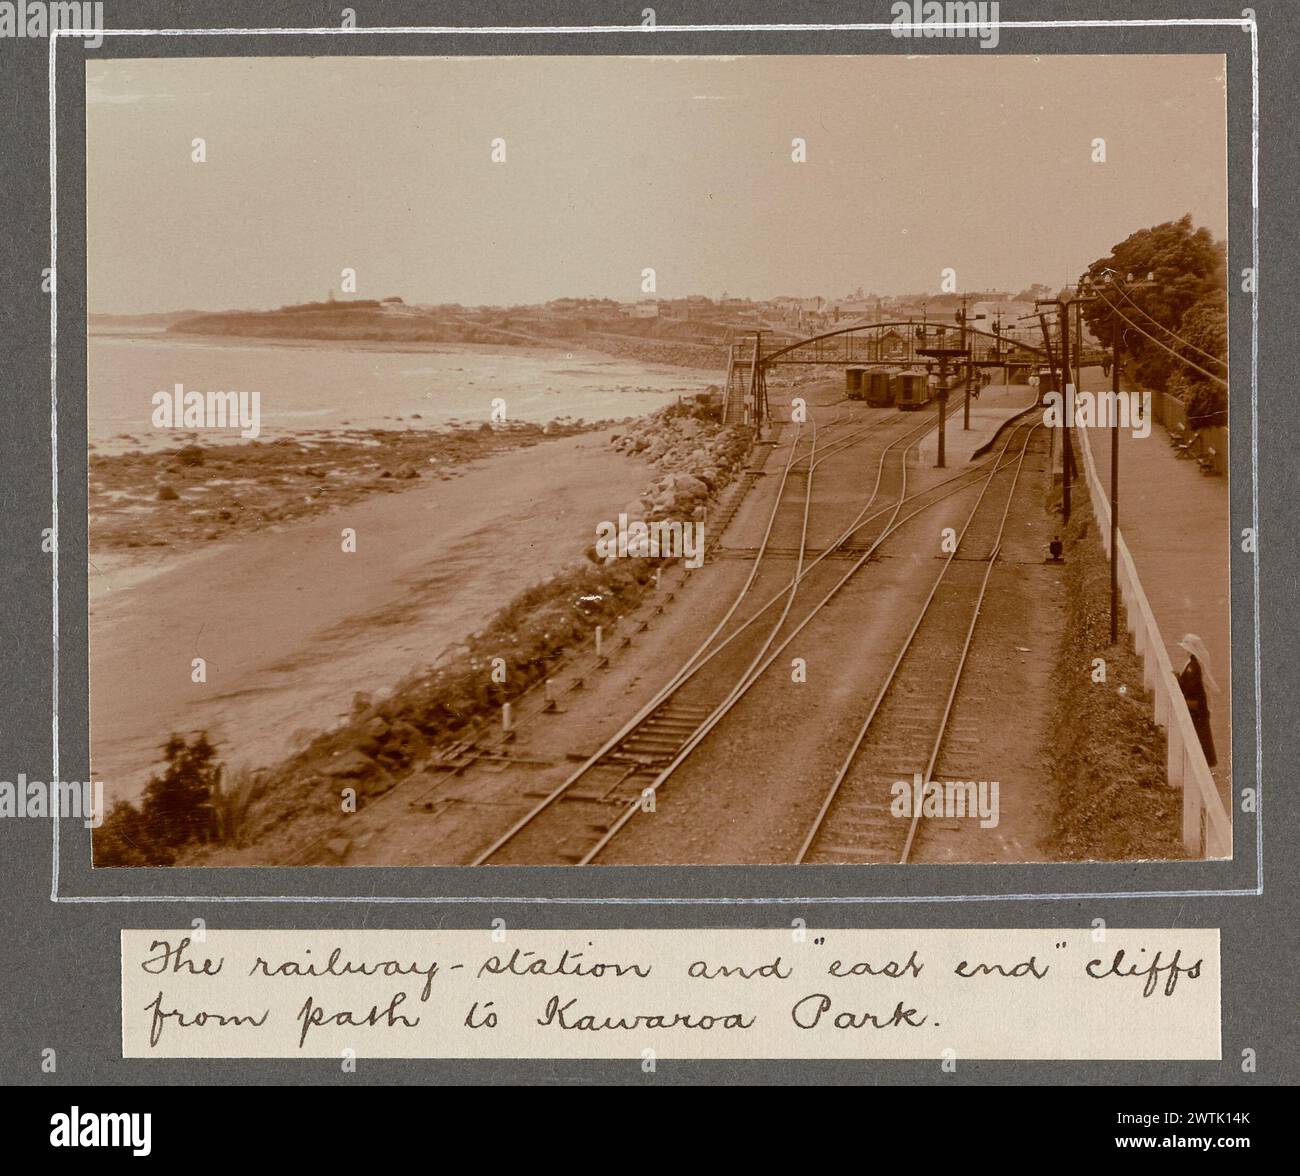 Our honeymoon at charming New Plymouth. December 14-20, 1915: The railway-station and 'east end' cliffs from path to Kawaroa Park. From the album: Family photographs. [1914-1917] photographic prints, gelatin silver prints Stock Photo